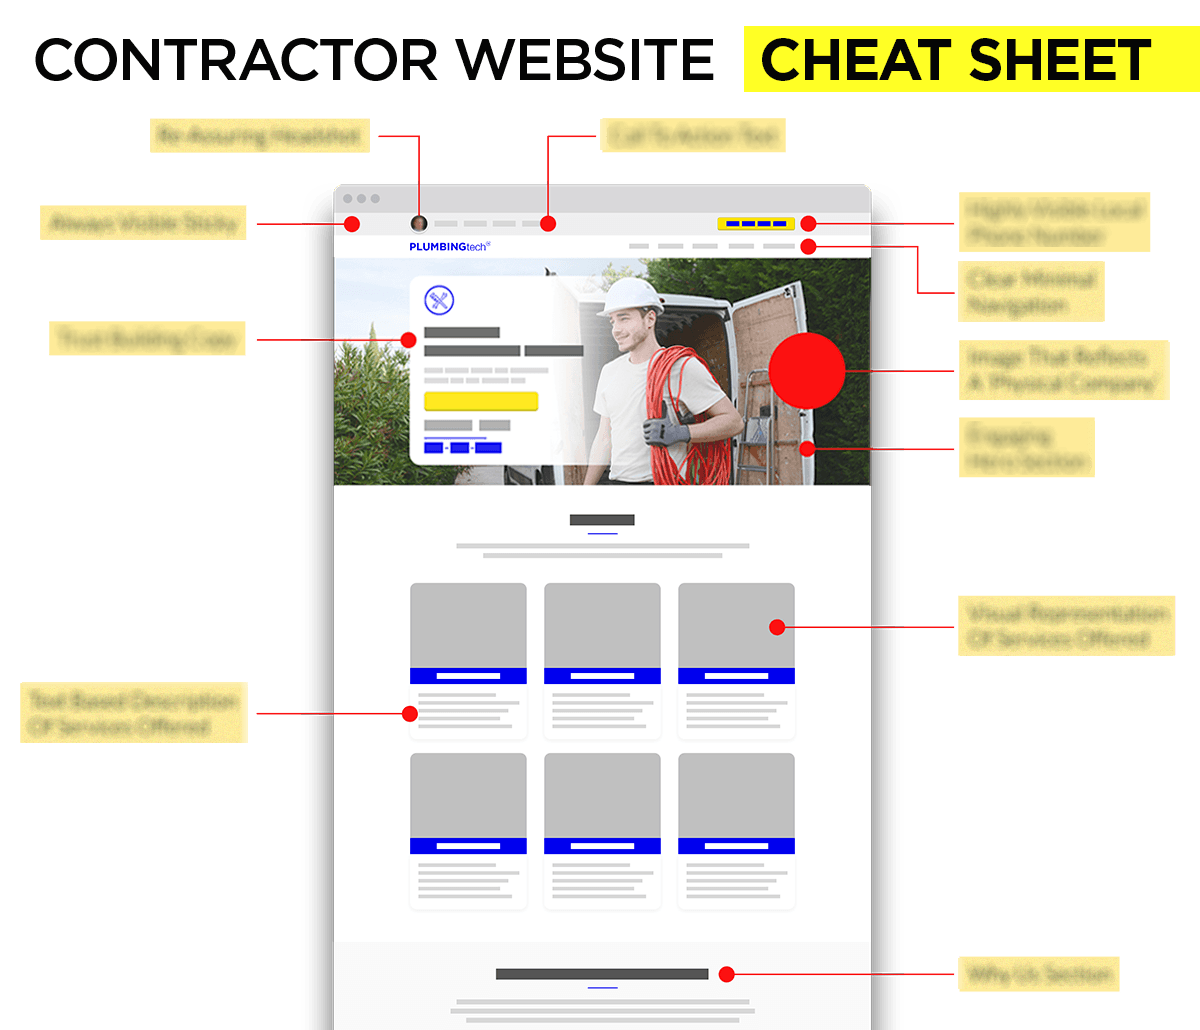 Contractor website framework based on our winning one page design.